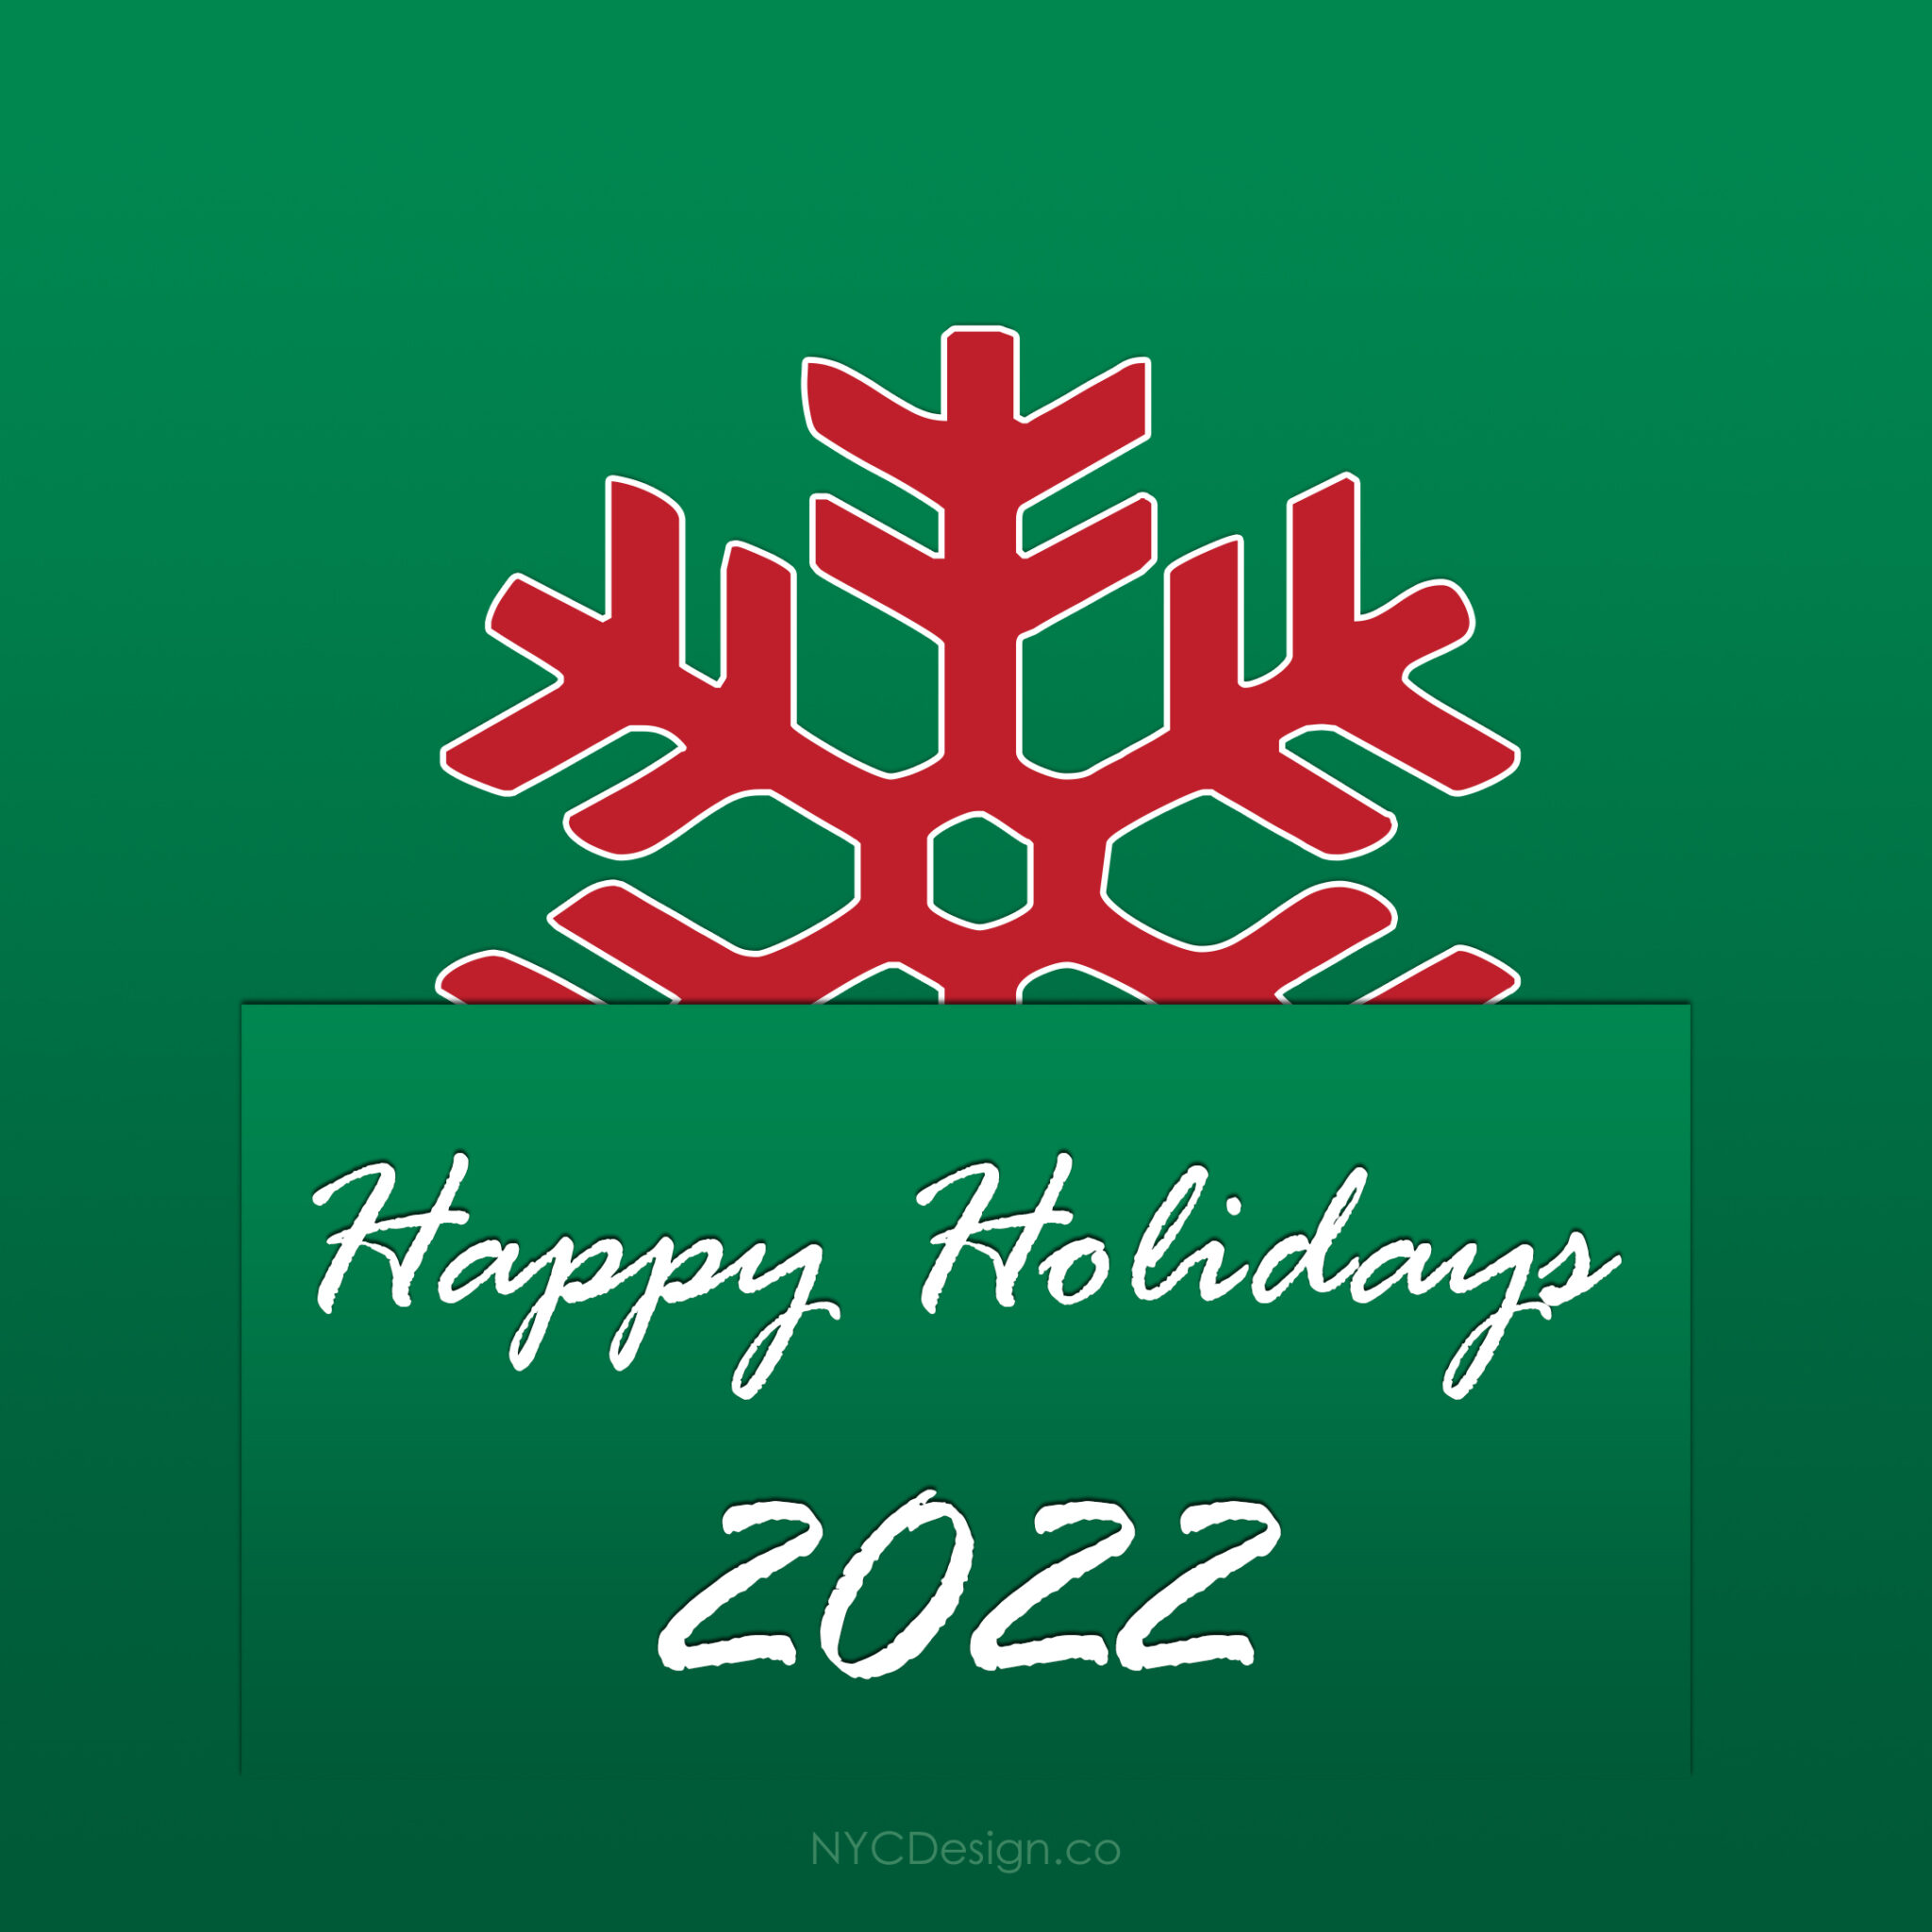 holiday-card-2022-free-printable-blue-card-red-snowflake